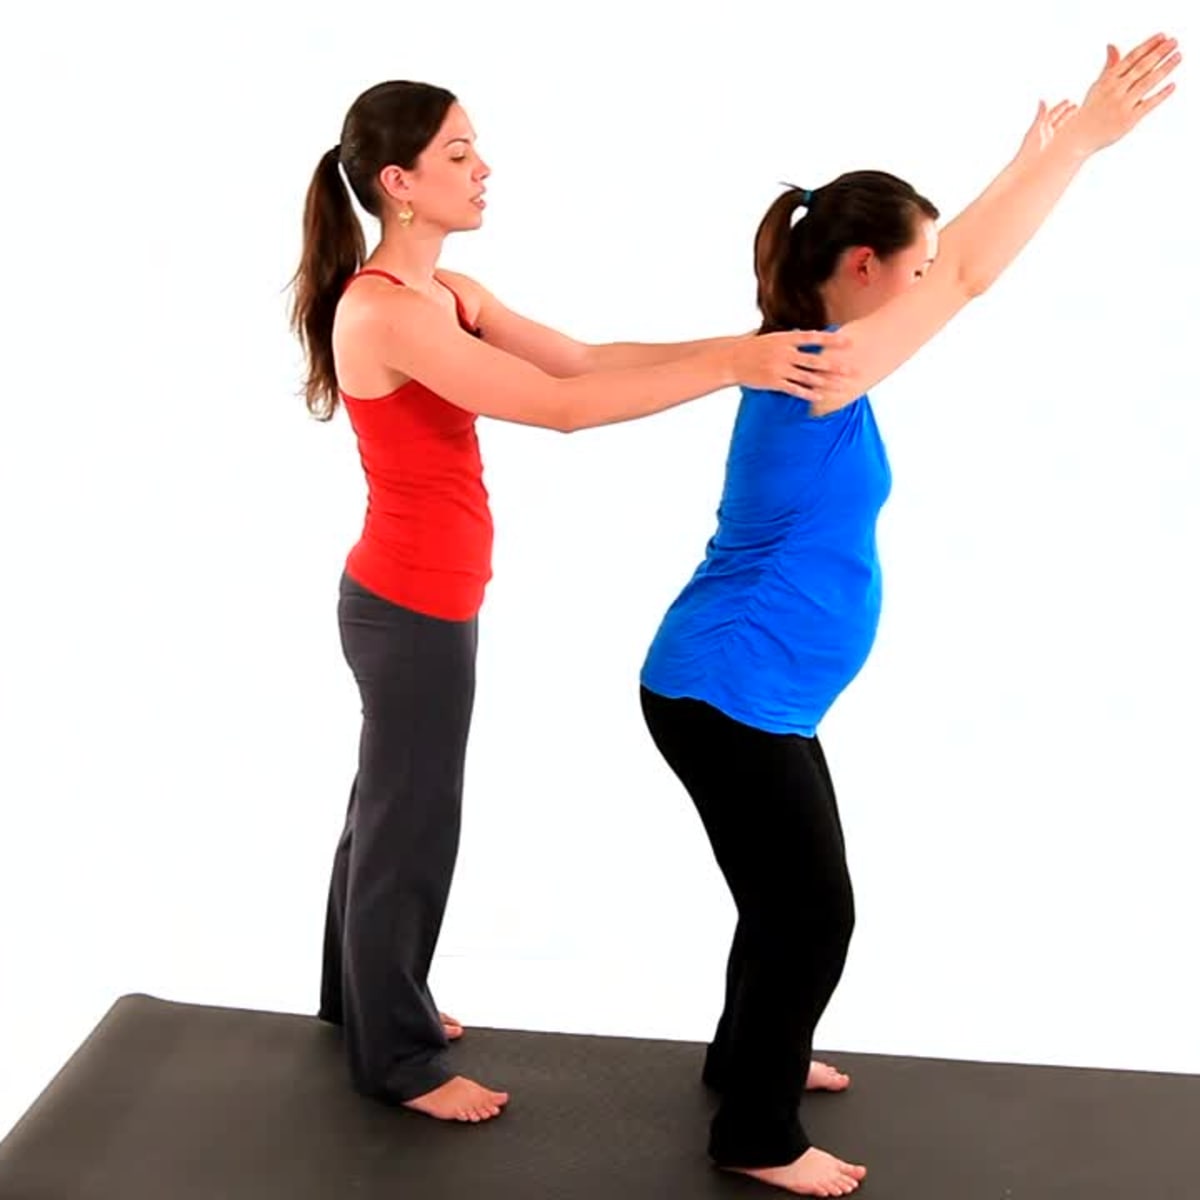 How to Do Prenatal Yoga Chair Pose for a Pregnancy Workout - Howcast